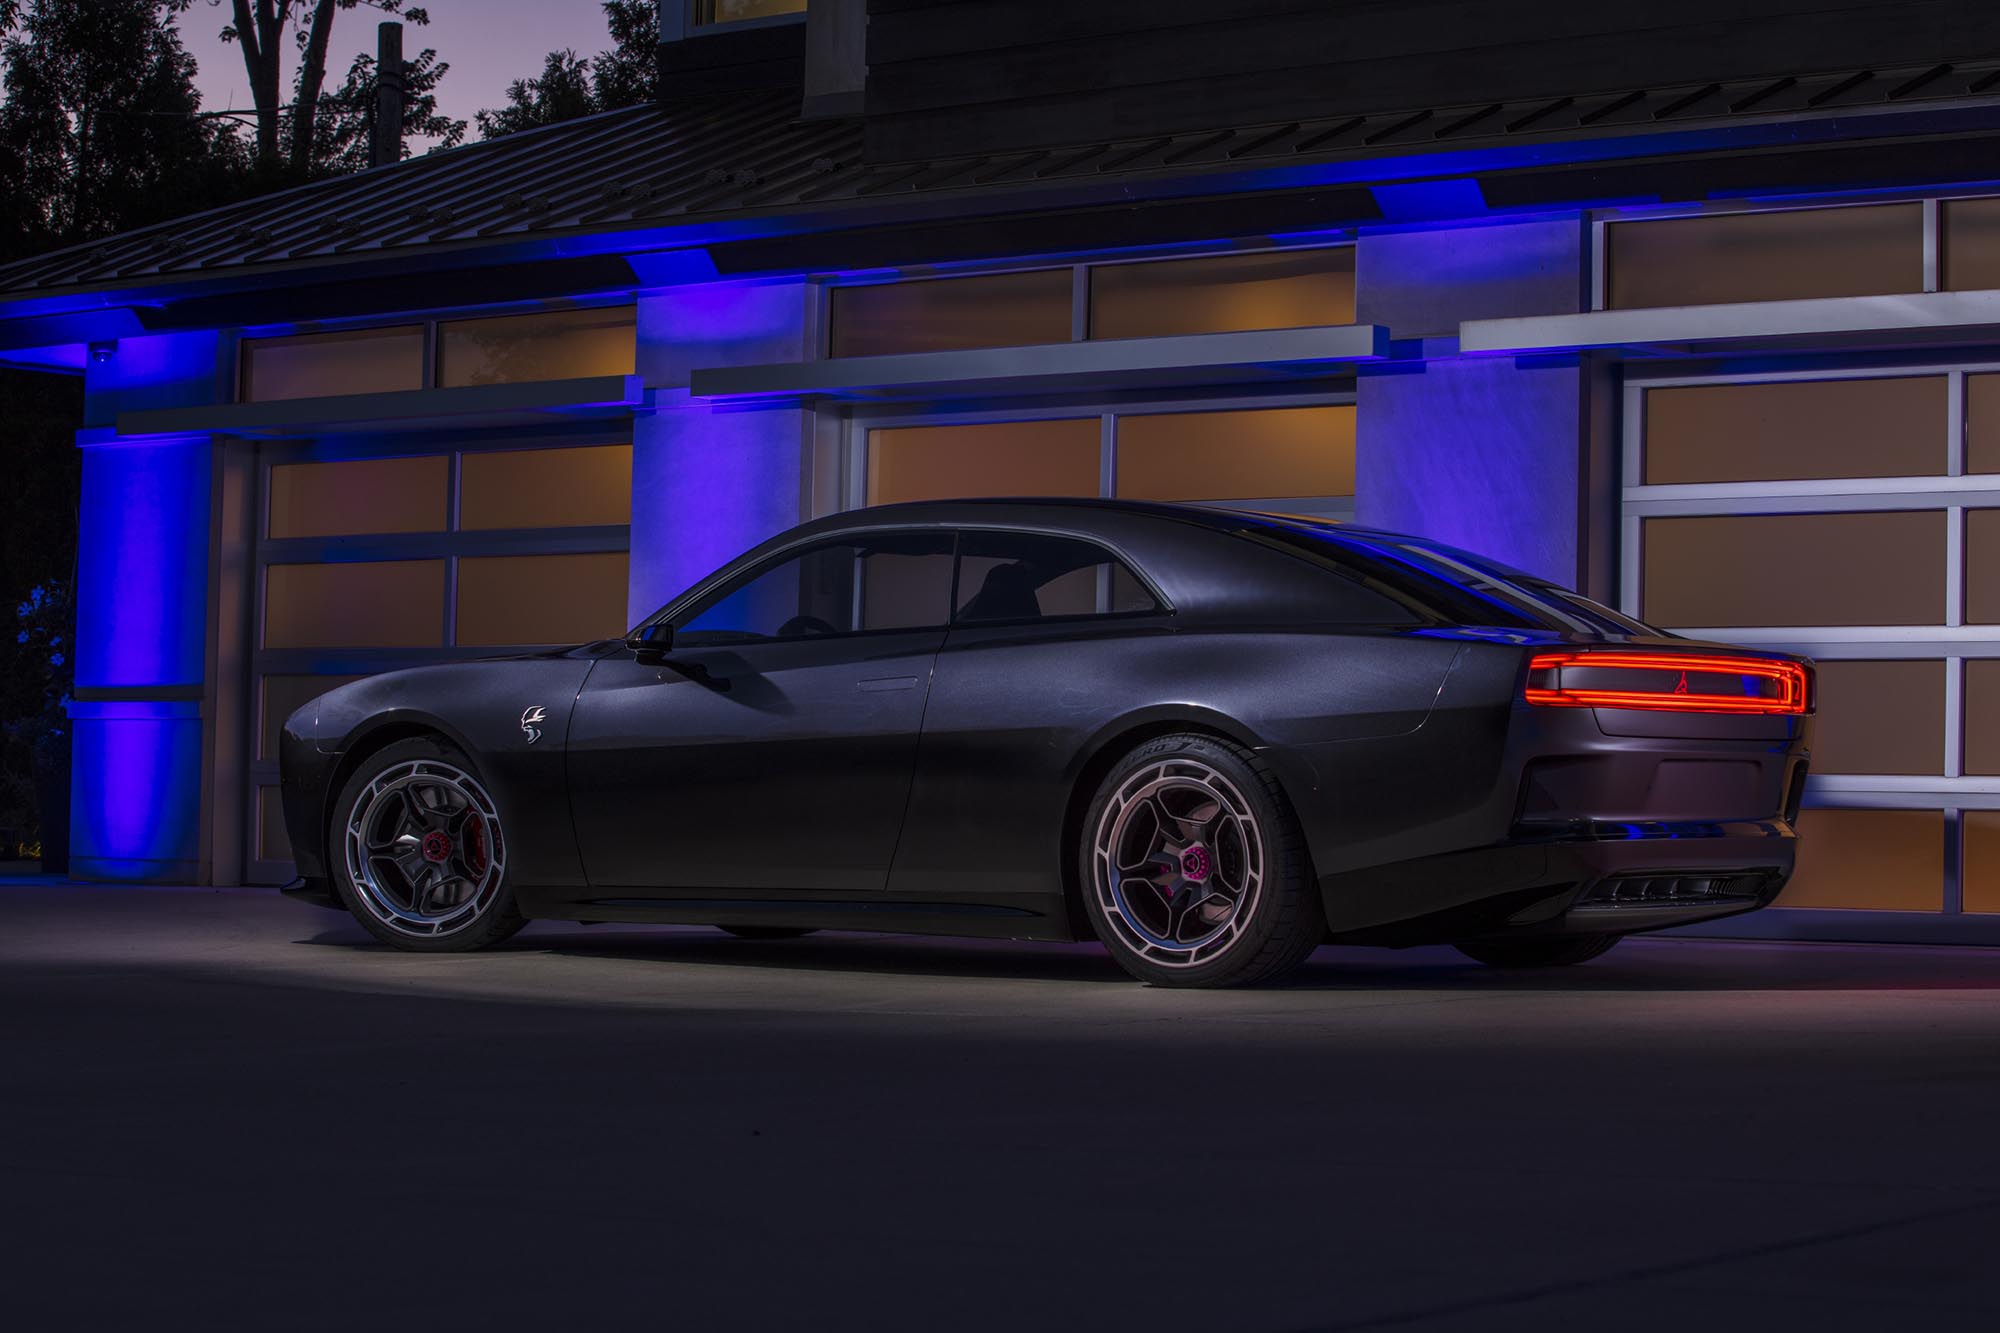 Dodge shows ‘Banshee’ electric Charger concept an EV with exhaust